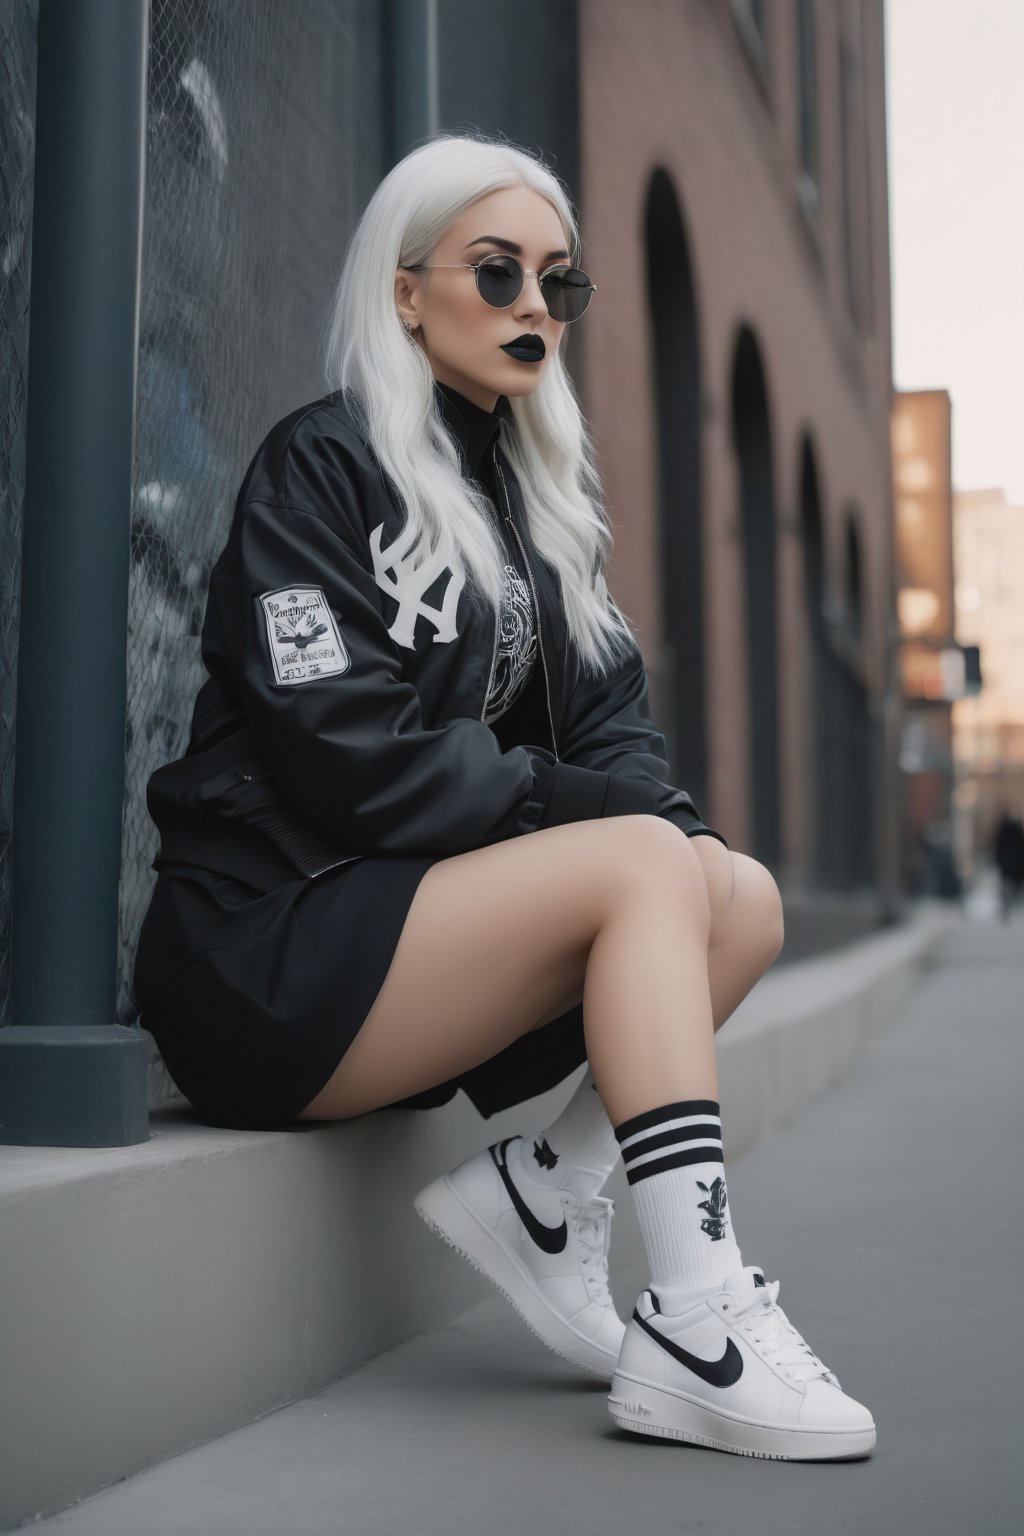 professional photoshot style, sharp focus, goth woman, long white hair, ((tattooed body)), ((tattooed face)), black lipstick, sunglasses, ((college jacket of New York Yankees)), black gathered skirt, black sneakers in Nike Air style, white crew socks, impressive photoshot, trending on fashion magazines, urban background, artgerm, ,fflixmj6, rich details, 8k, intricate details, atmospheric lighting, 35mm photograph, professional, highly detailed, high budget, moody, epic, gorgeous, proportional,